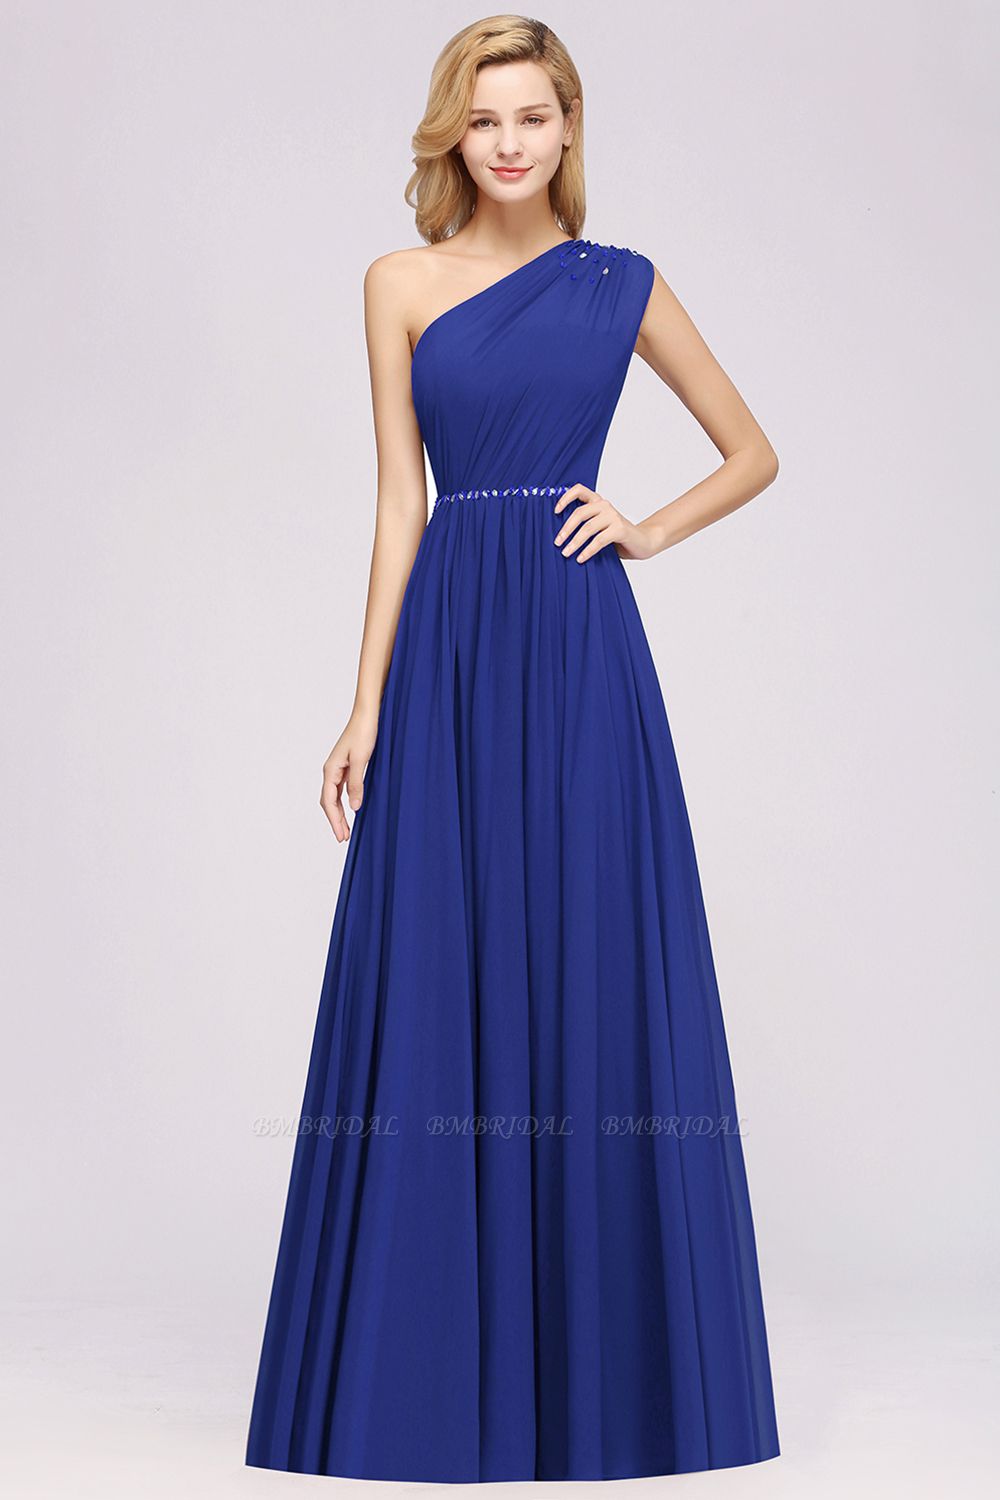 BMbridal Modest One-shoulder Royal Blue Affordable Bridesmaid Dress with Beadings